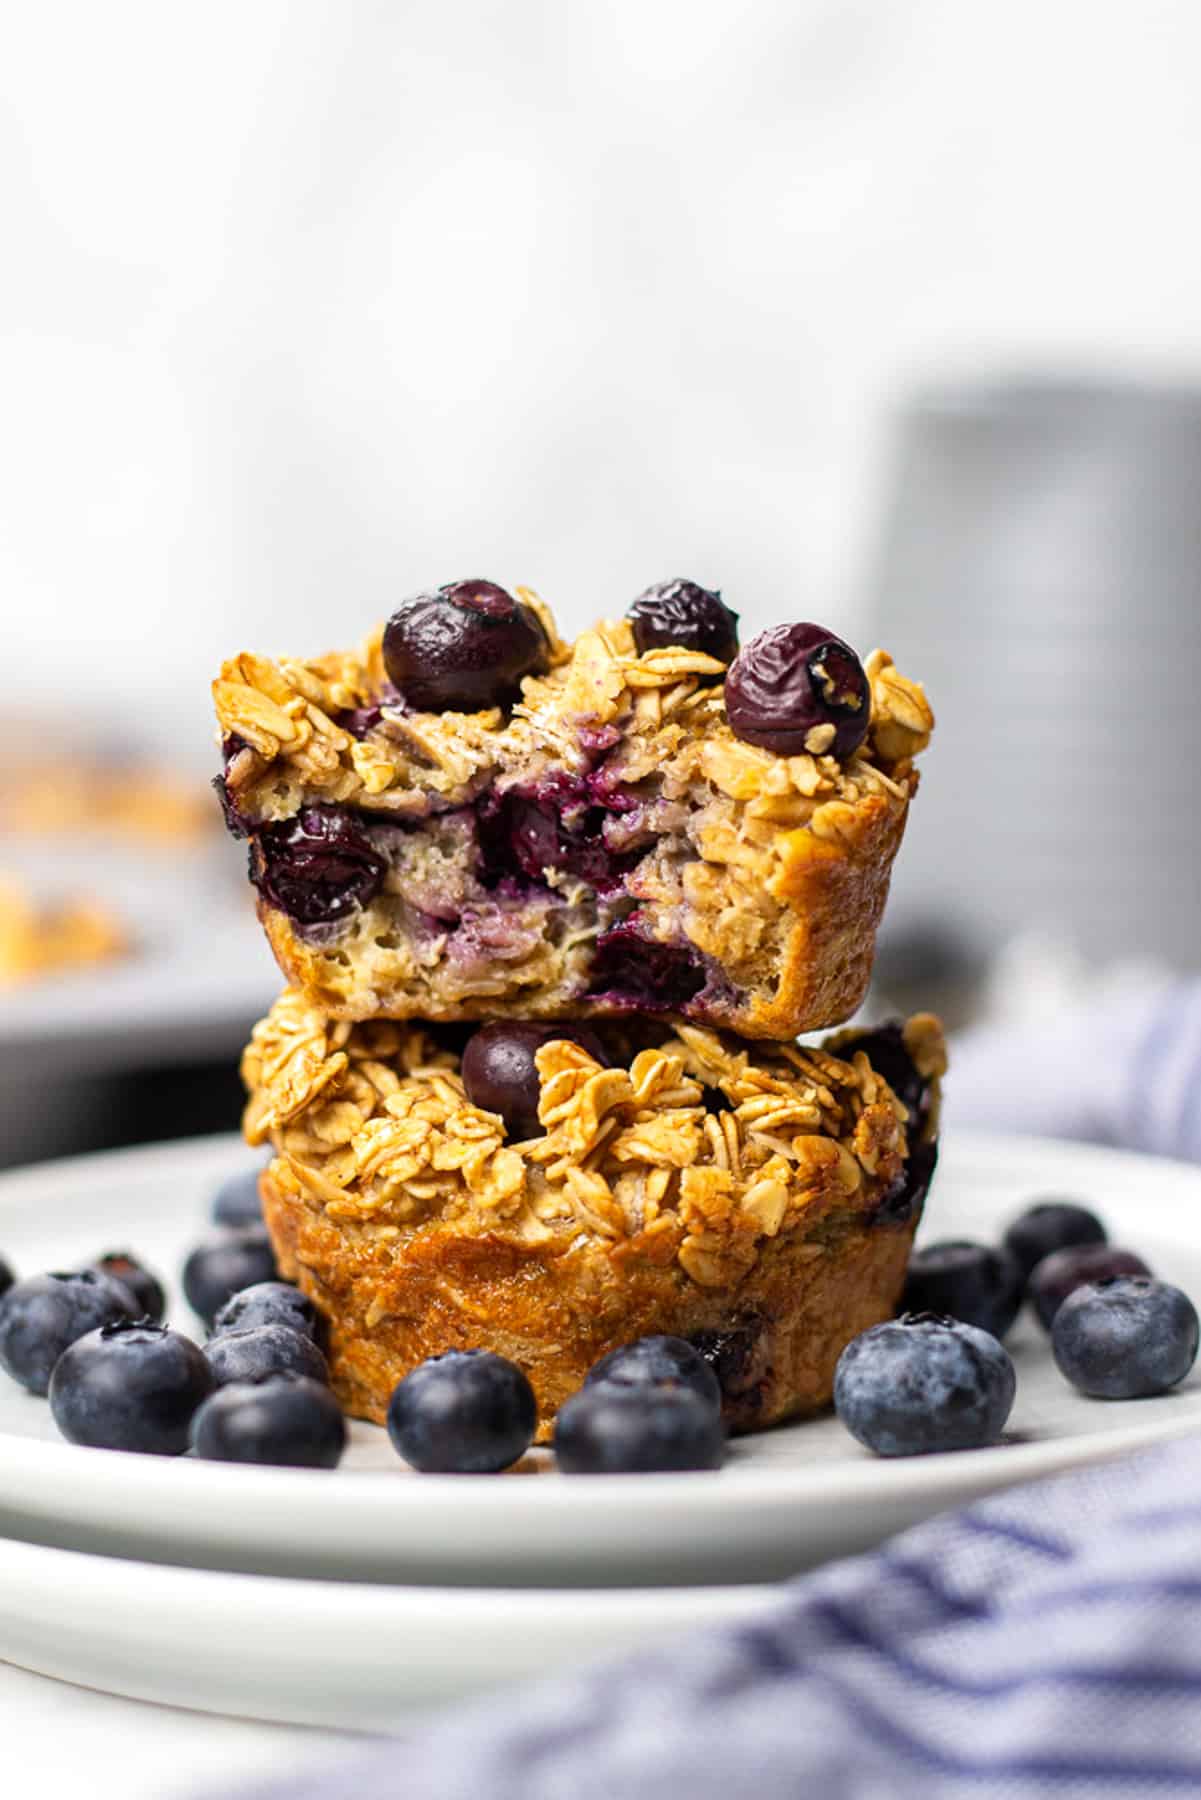 Blueberry Baked Oatmeal Cups on top of each other on a plate with blueberries around them.